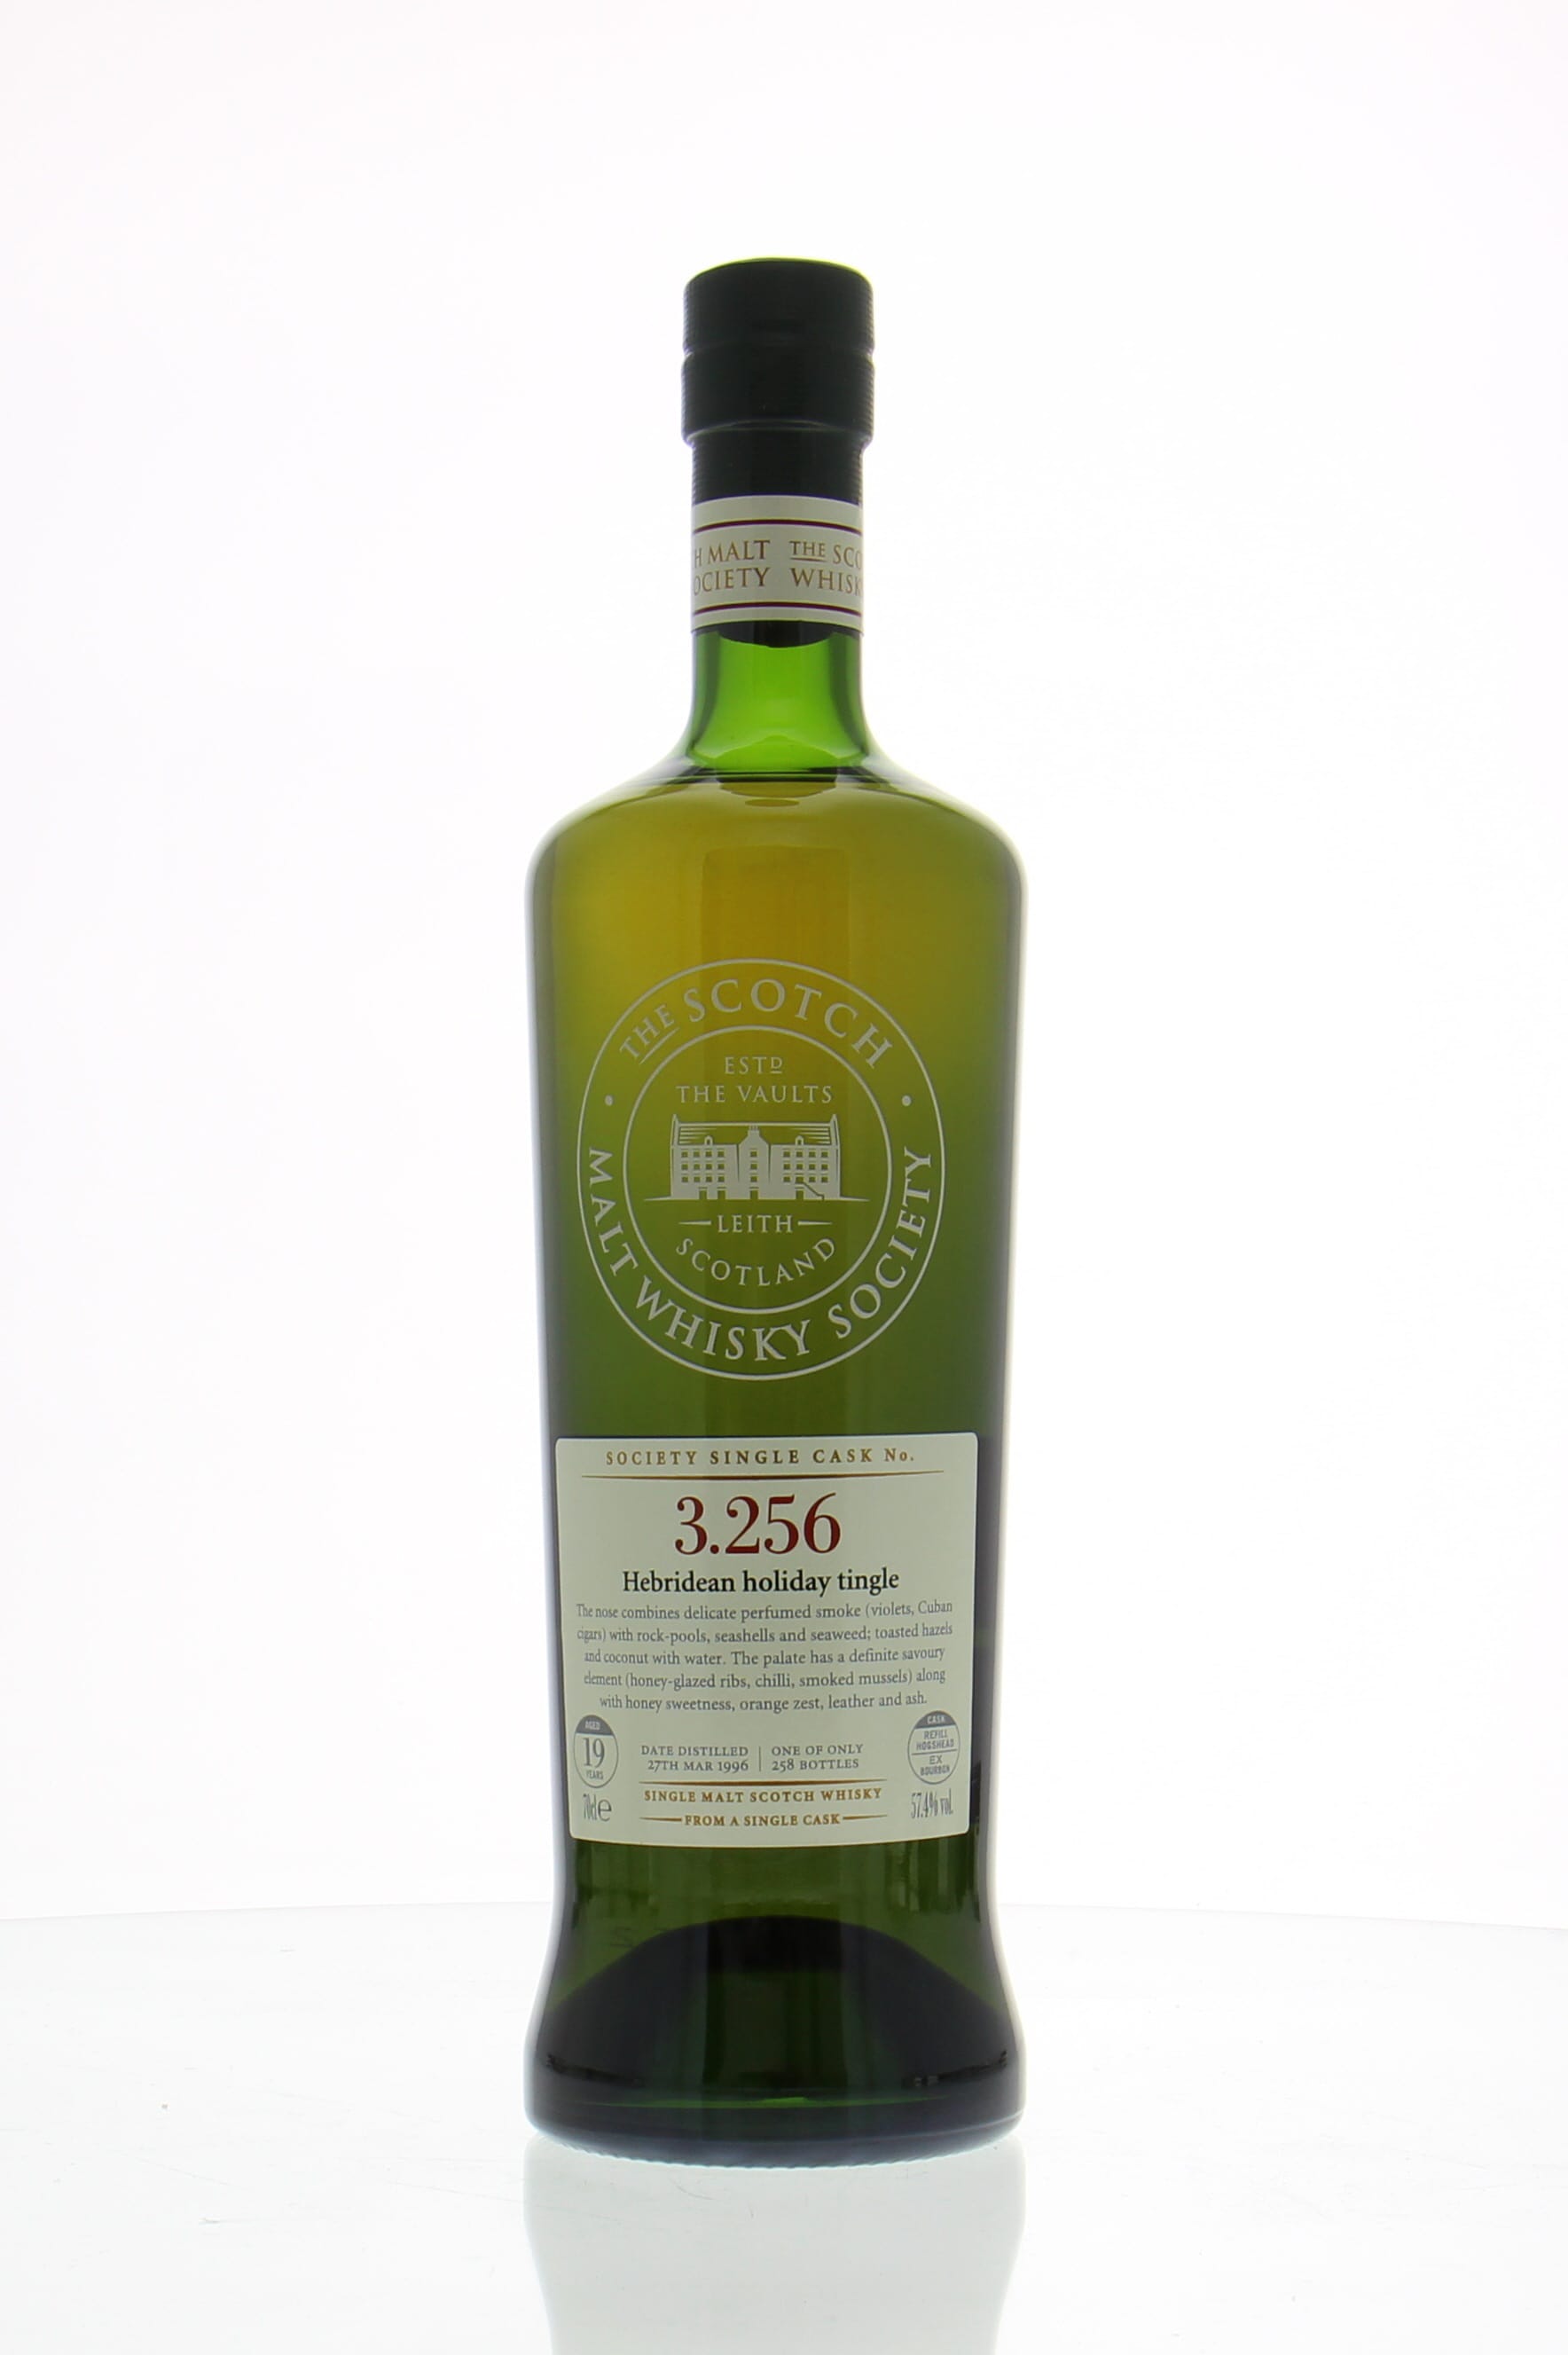 Bowmore - 19 Years Old SMWS 3.256 Hebridean holiday tingle  57.4% 1996 Perfect